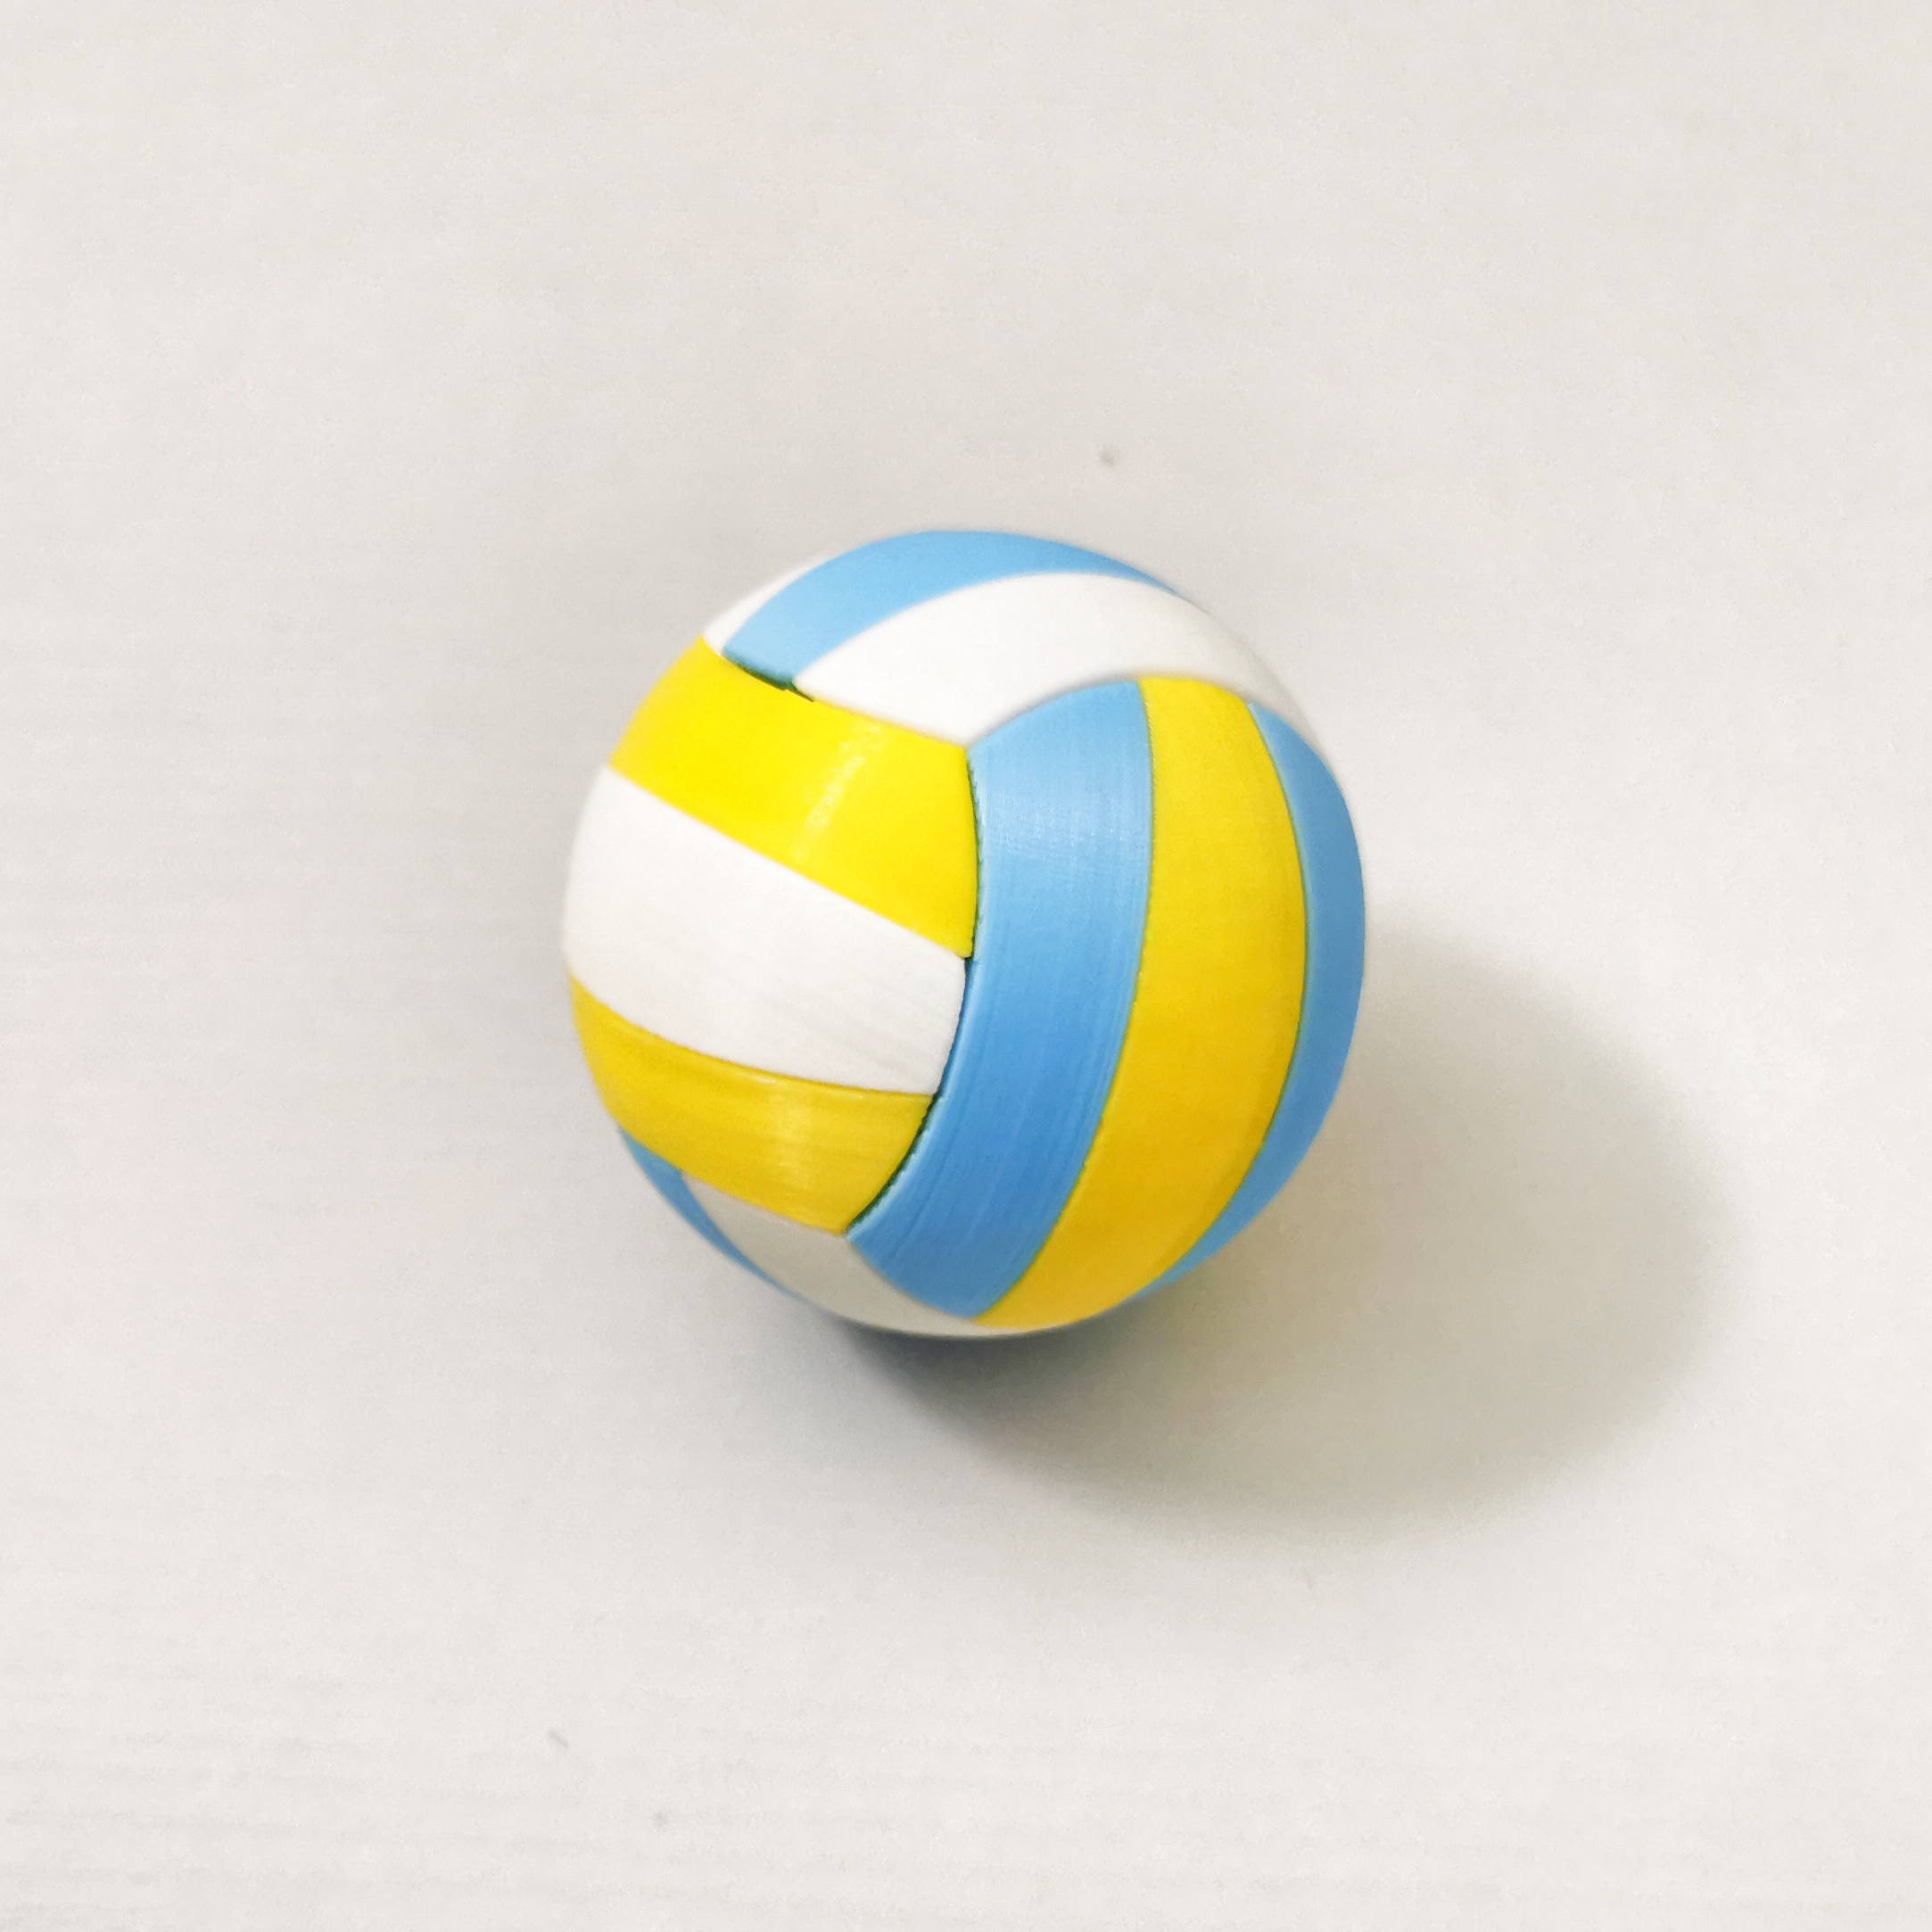 VOLLEYBALL K-PIN PUZZLE by heyvye | Download free STL model ...